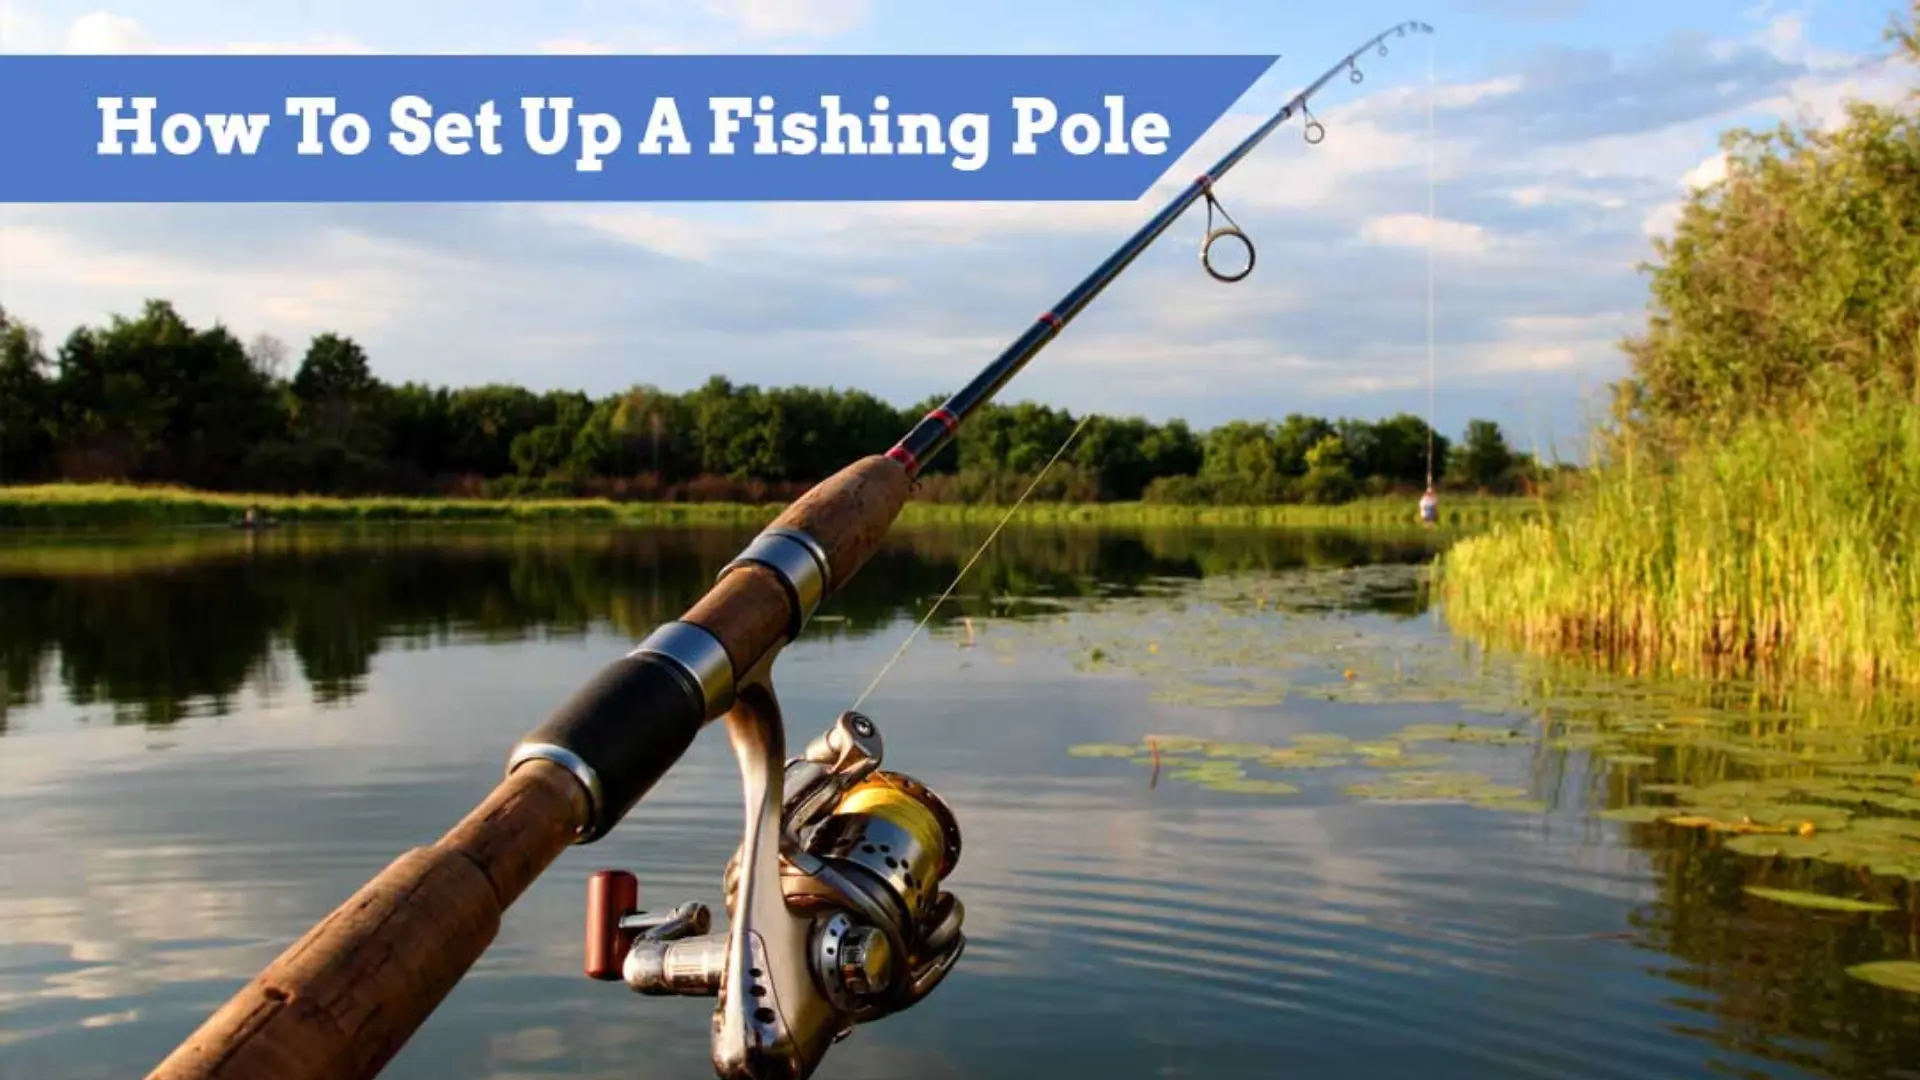 types of equipment to Set Up A Fishing Pole